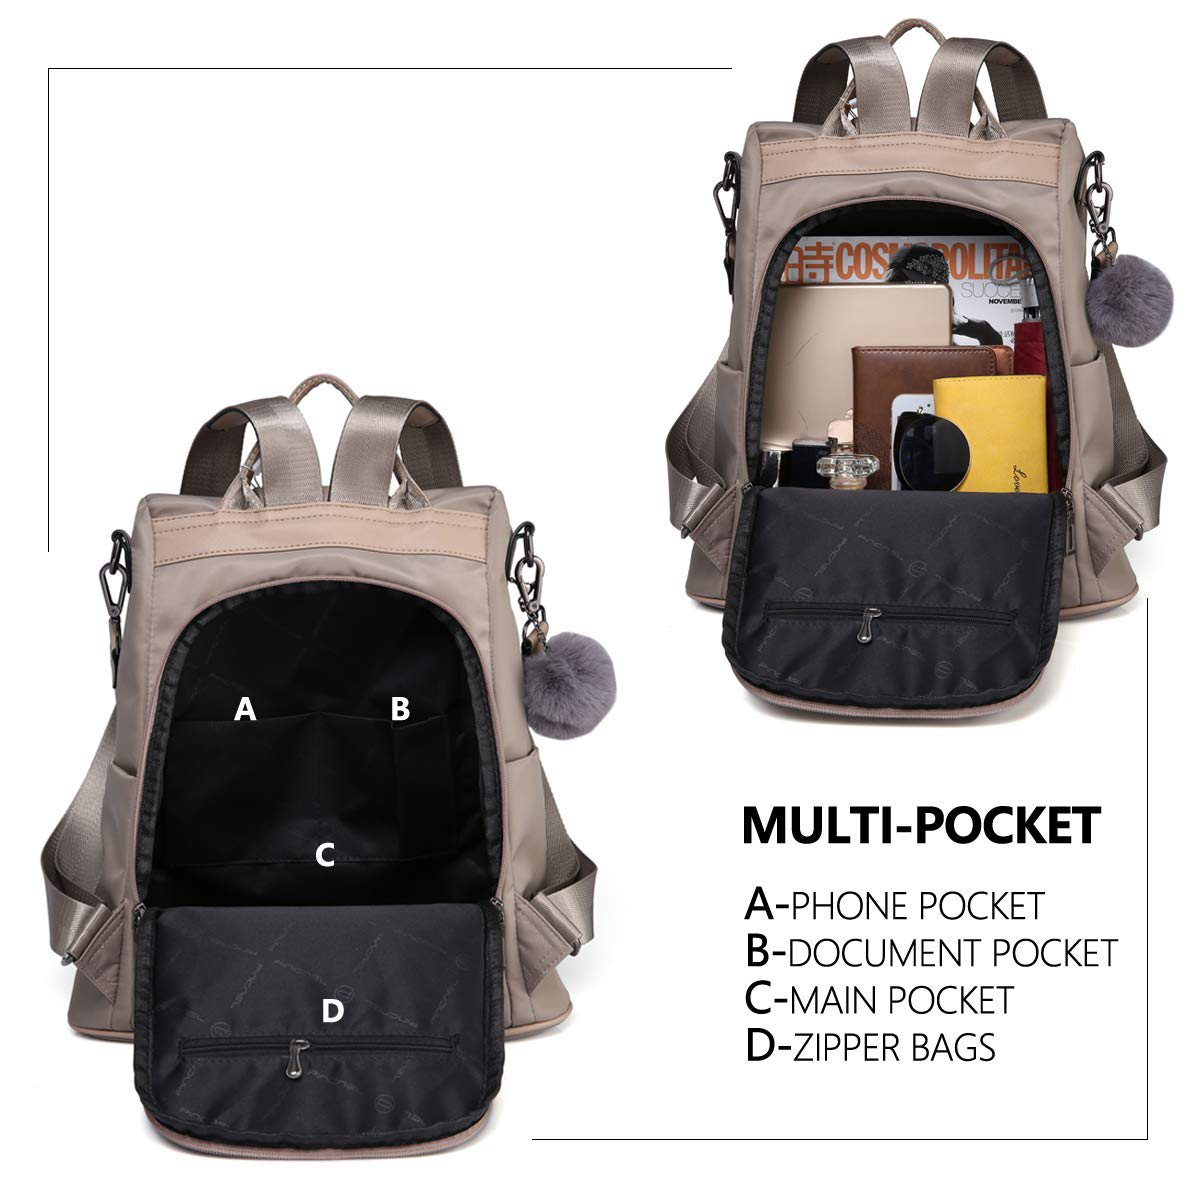 This Anti-Theft Backpack Has 3,000 Reviews and Couldn’t Be Cuter ...